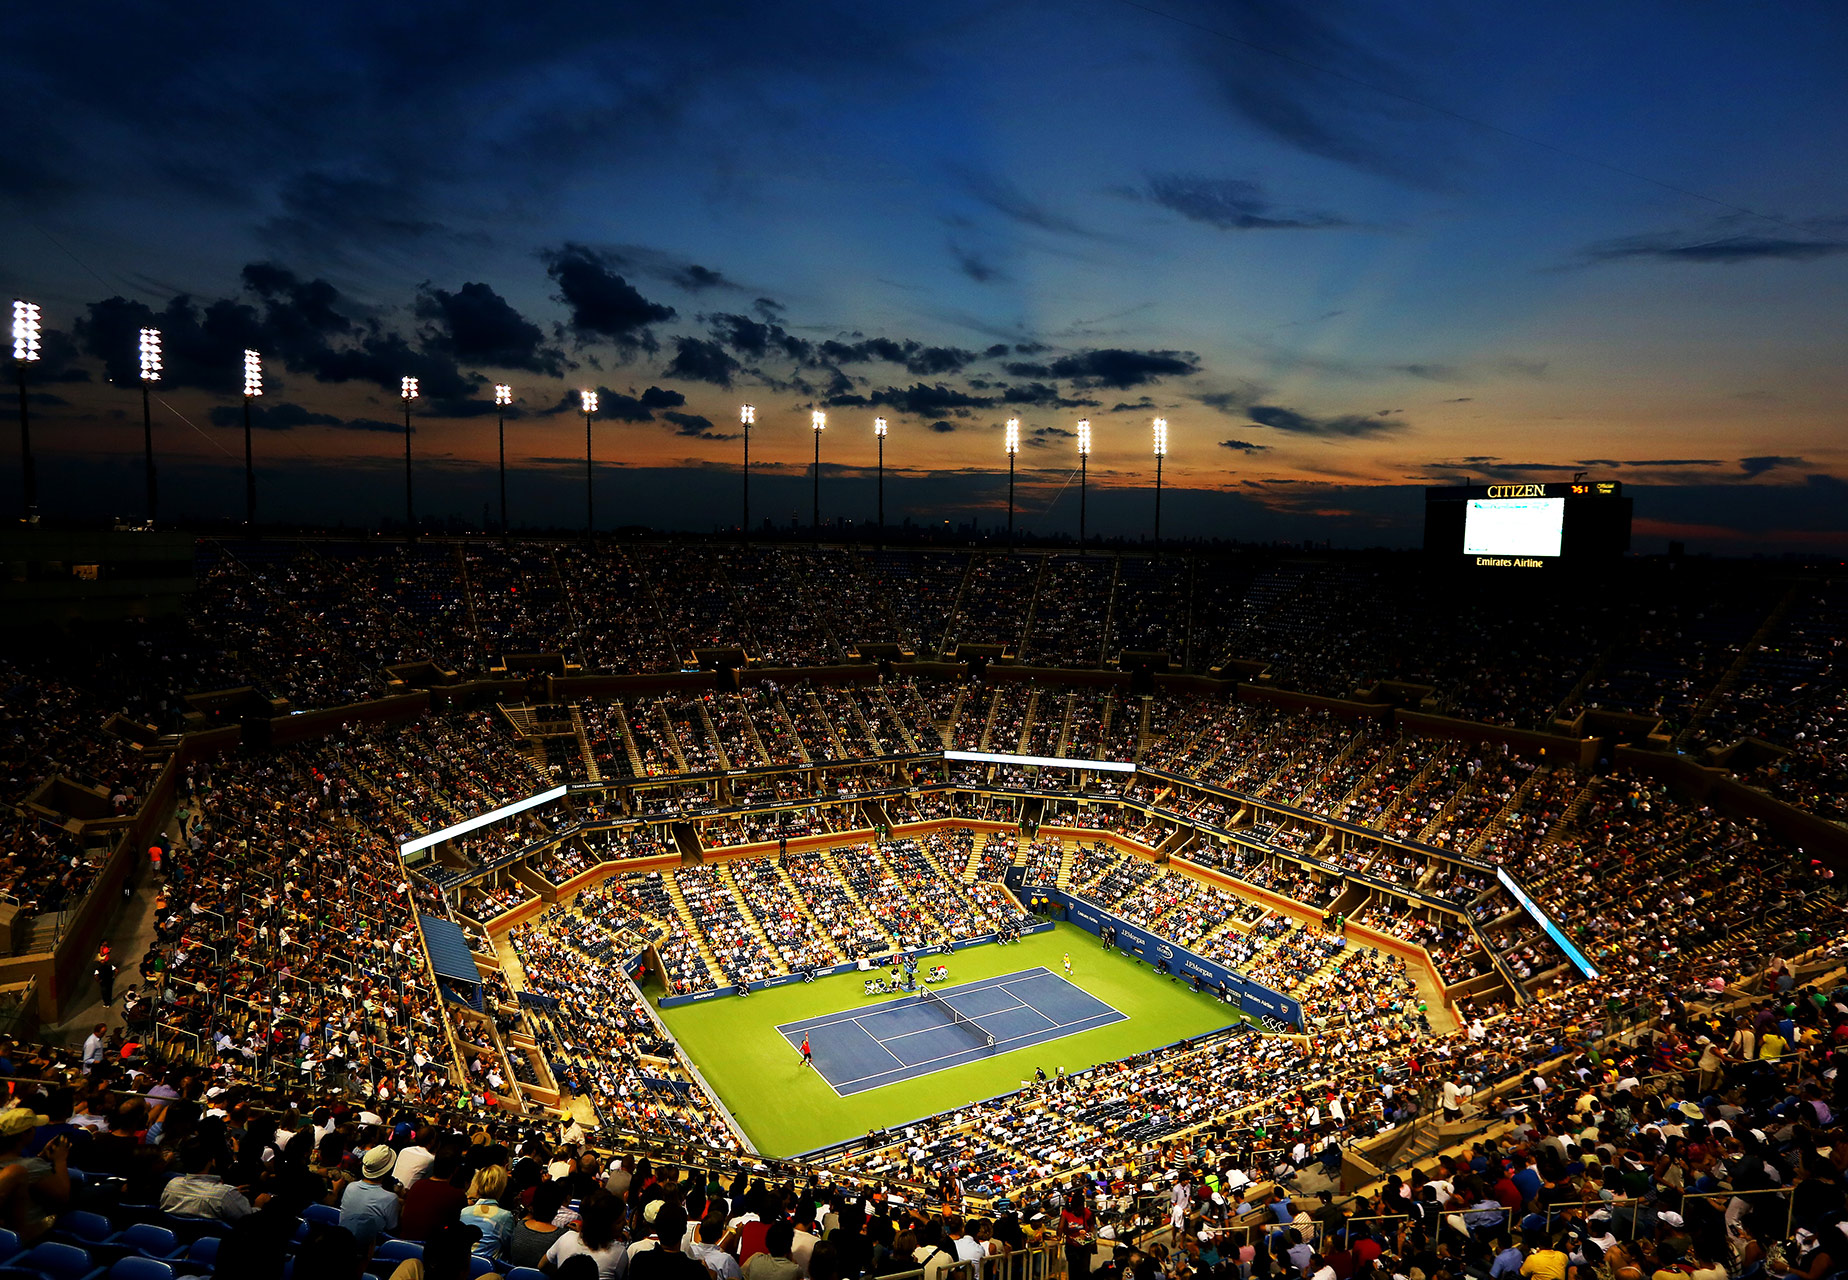 US Open-US Open Tennis Championship: Session 1 - Men's/Women's 1st Round tickets price and order